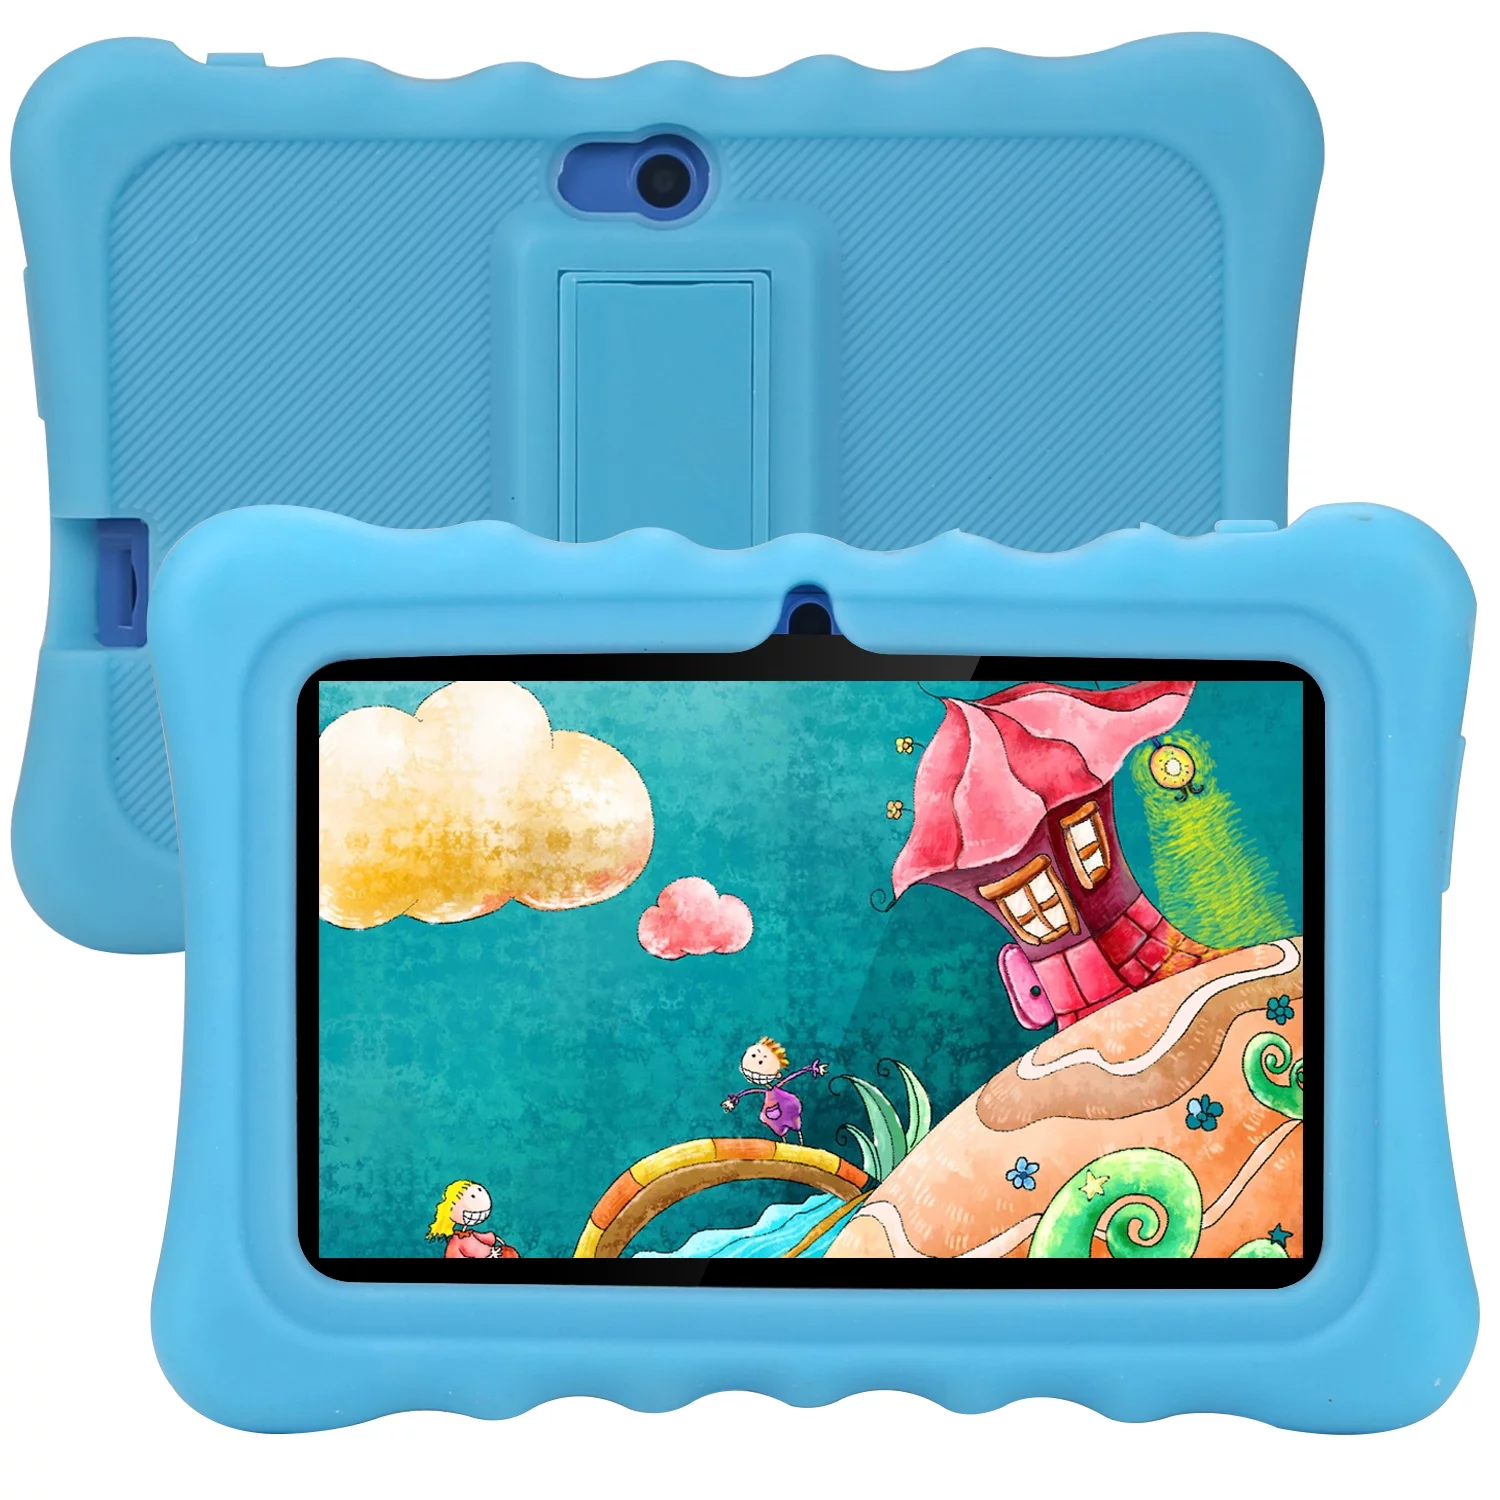 Tagital T7K Plus 7” Android Kids Tablet WiFi Camera for Children Infants Toddlers Kids Parental Control with Kickoff Stand Case Android 9.0 (2020 Version)